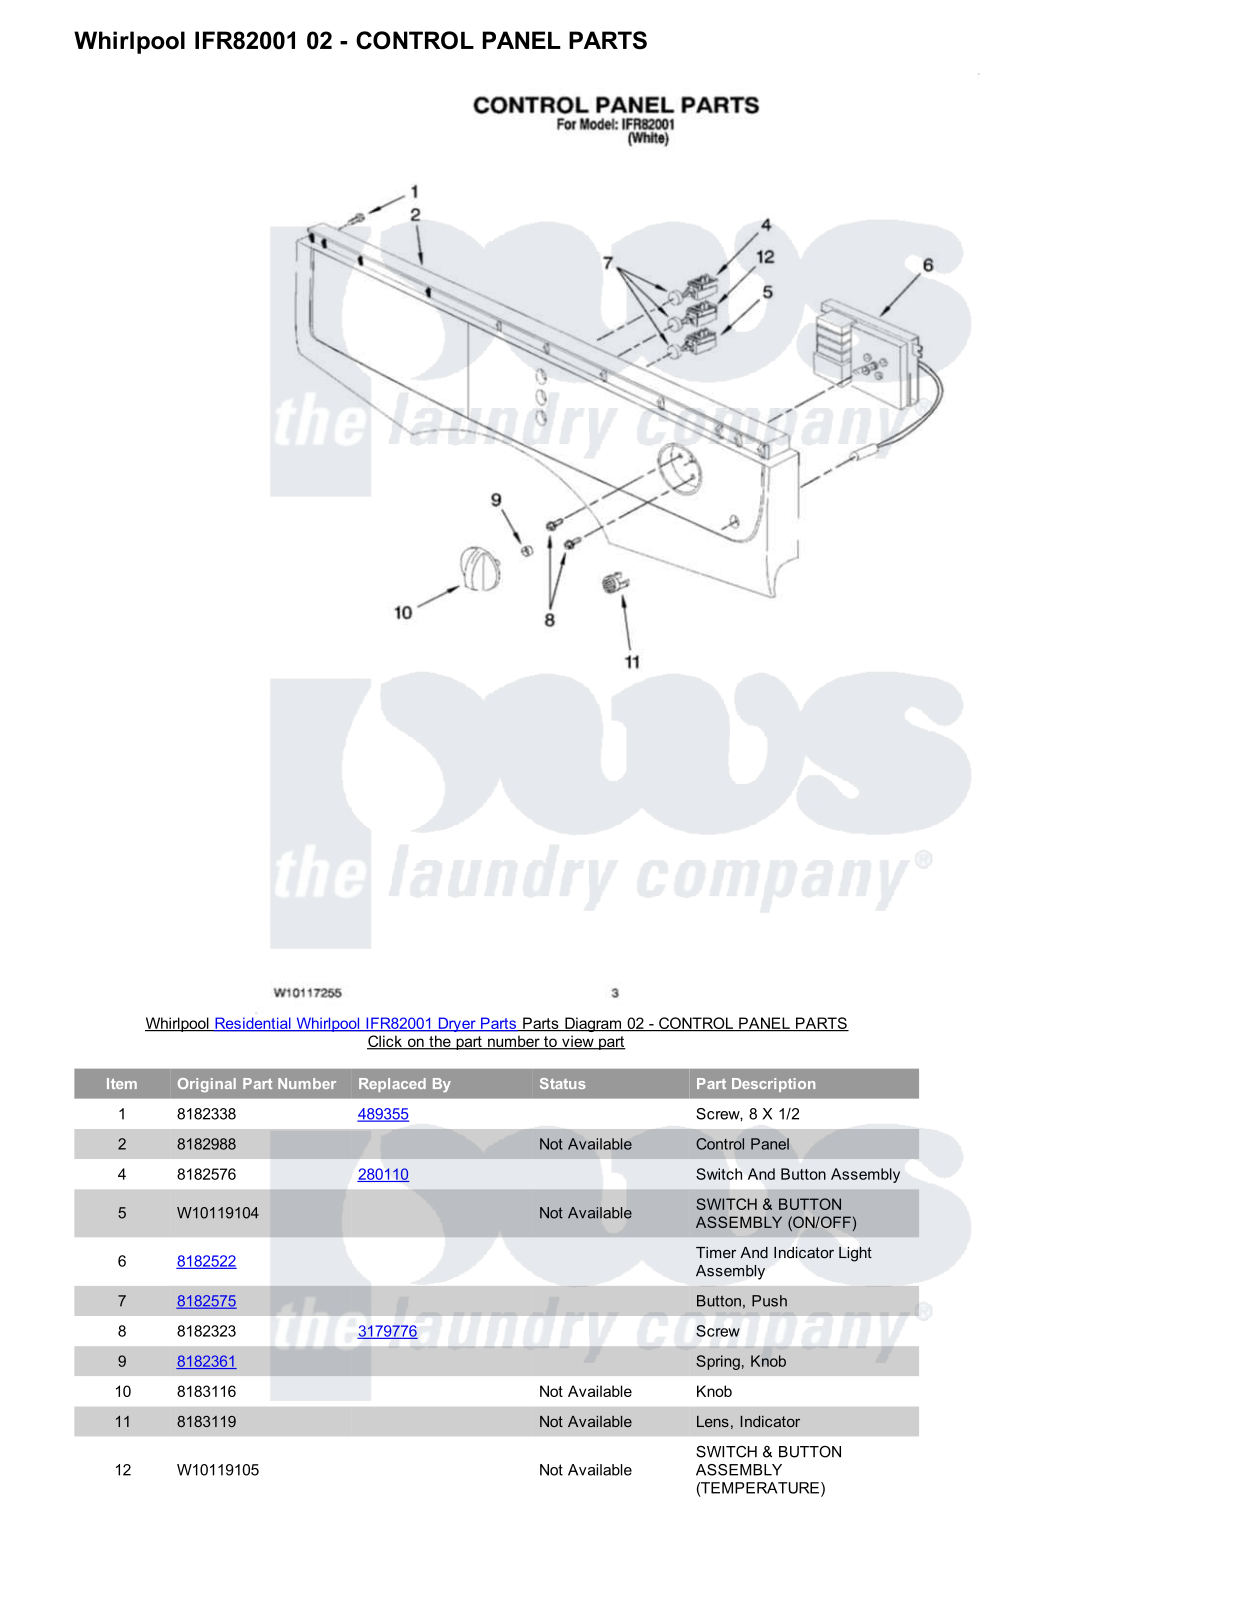 Whirlpool IFR82001 Parts Diagram